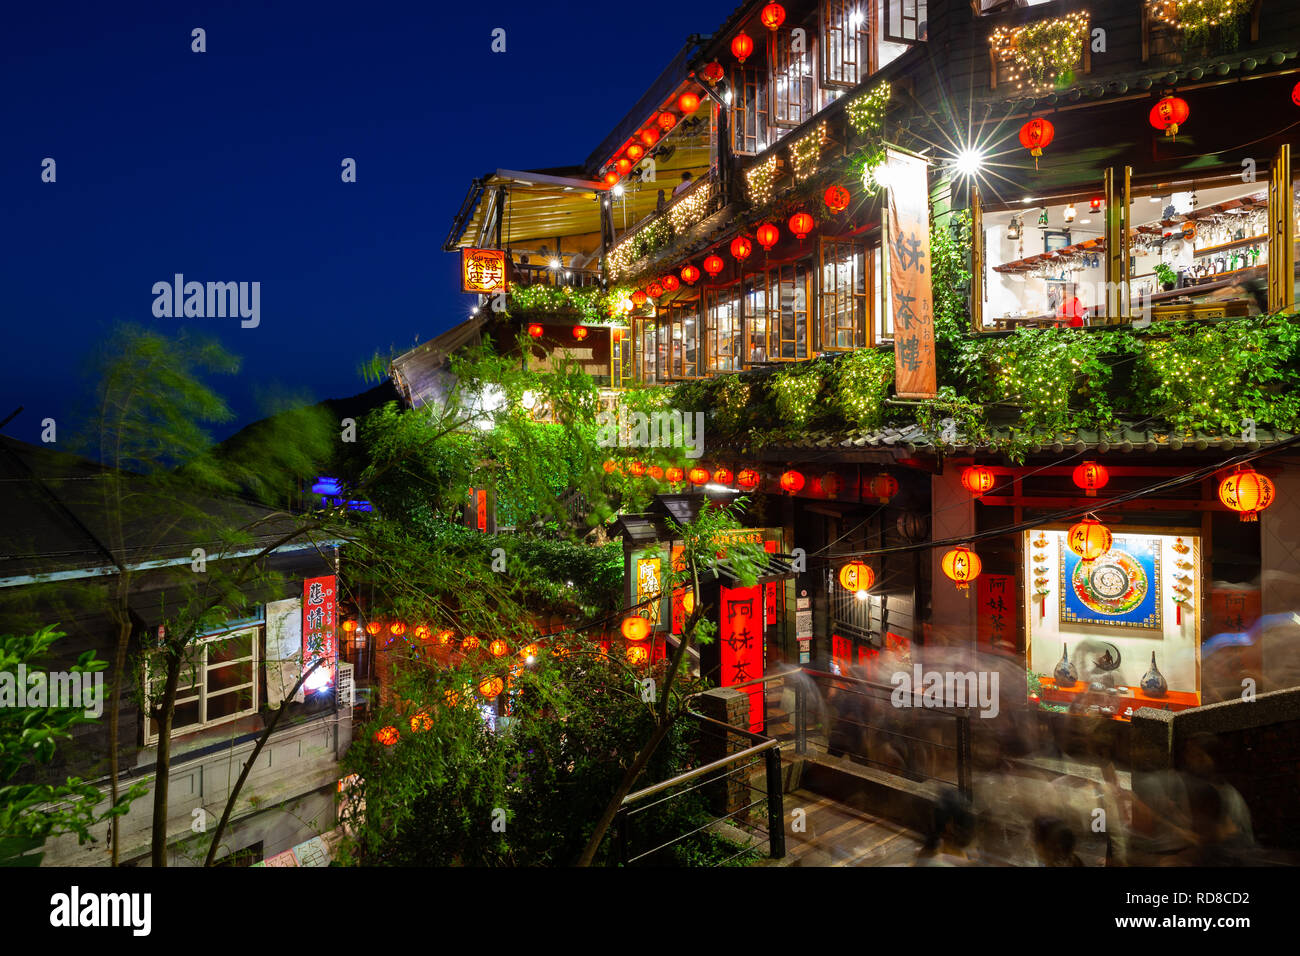 Jiufen, Taiwan - November 7, 2018: A night view of the famous old teahouse decorated with Chinese lanterns, Jiufen Old Street, Taiwan on November 02 2 Stock Photo